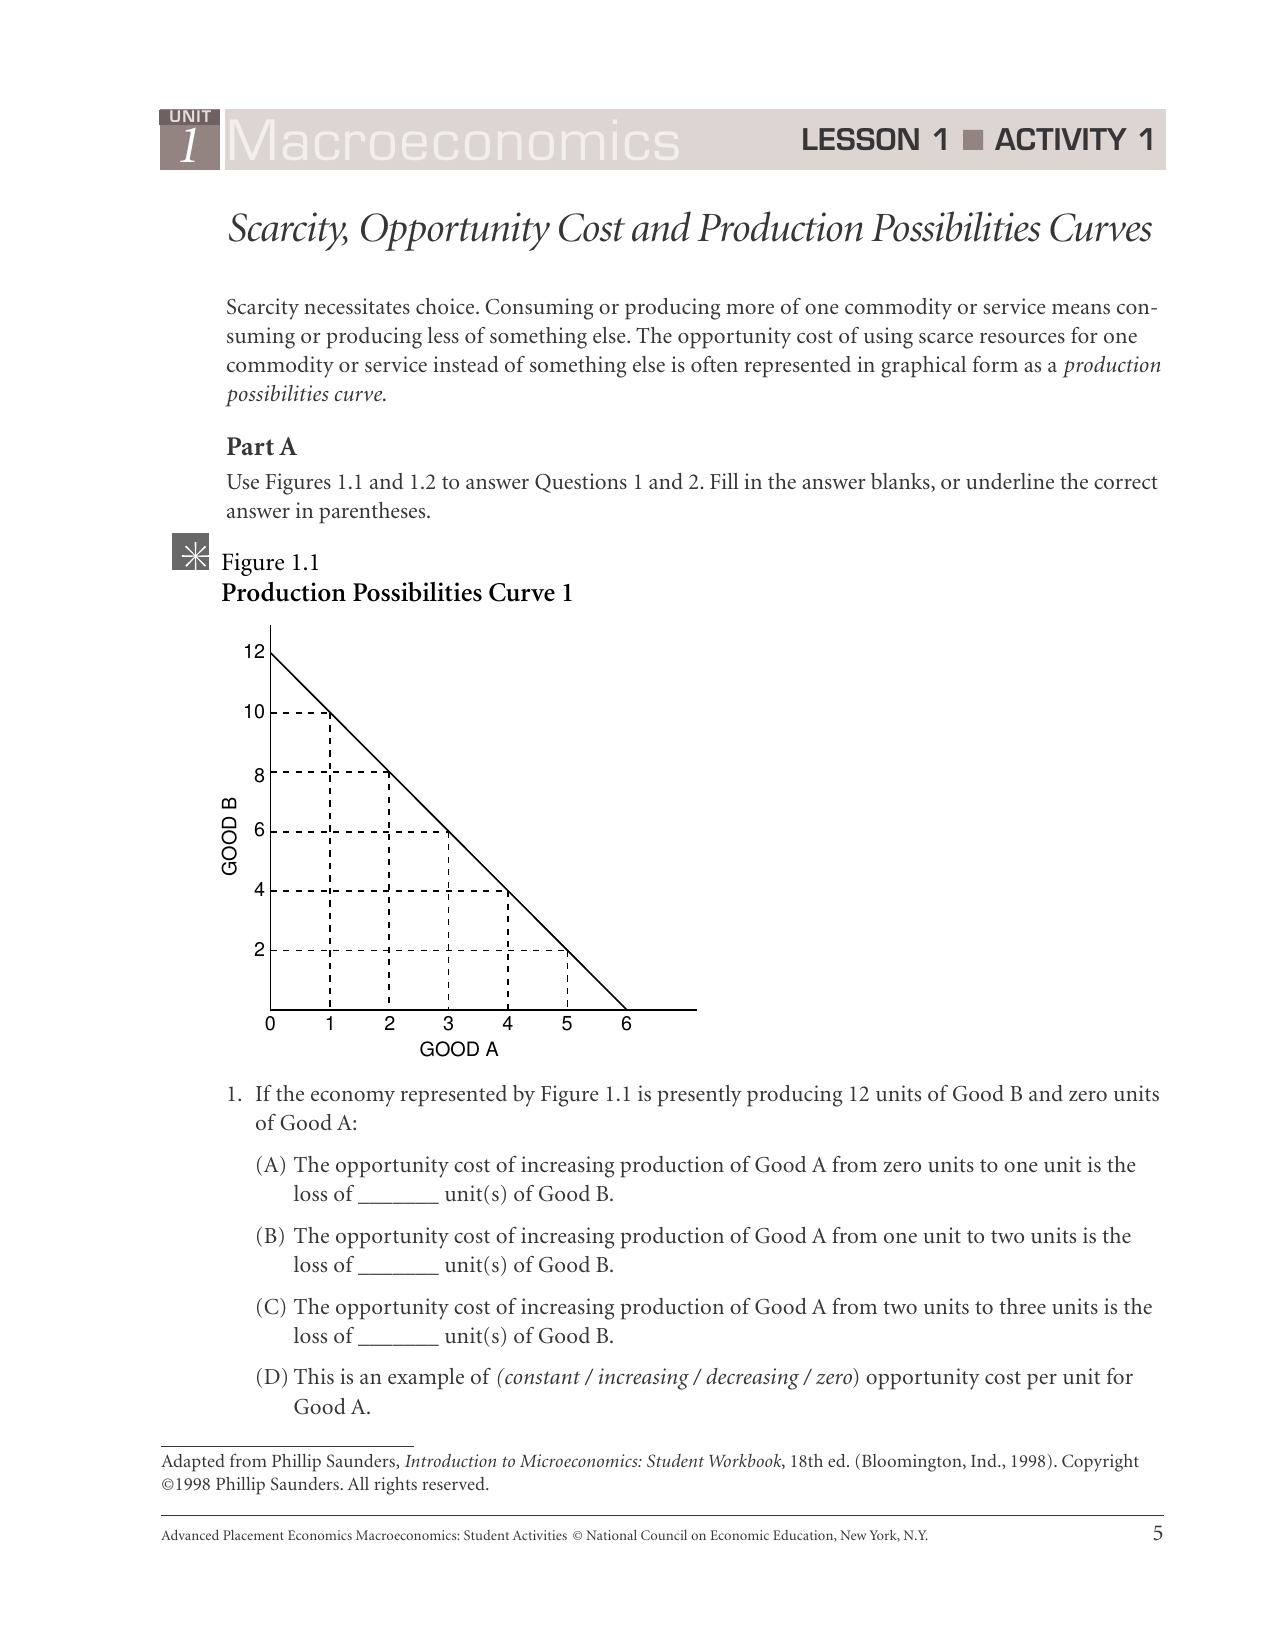 Scarcity, Opportunity Cost, and Production Possibilities Curves Intended For Production Possibilities Curve Worksheet Answers